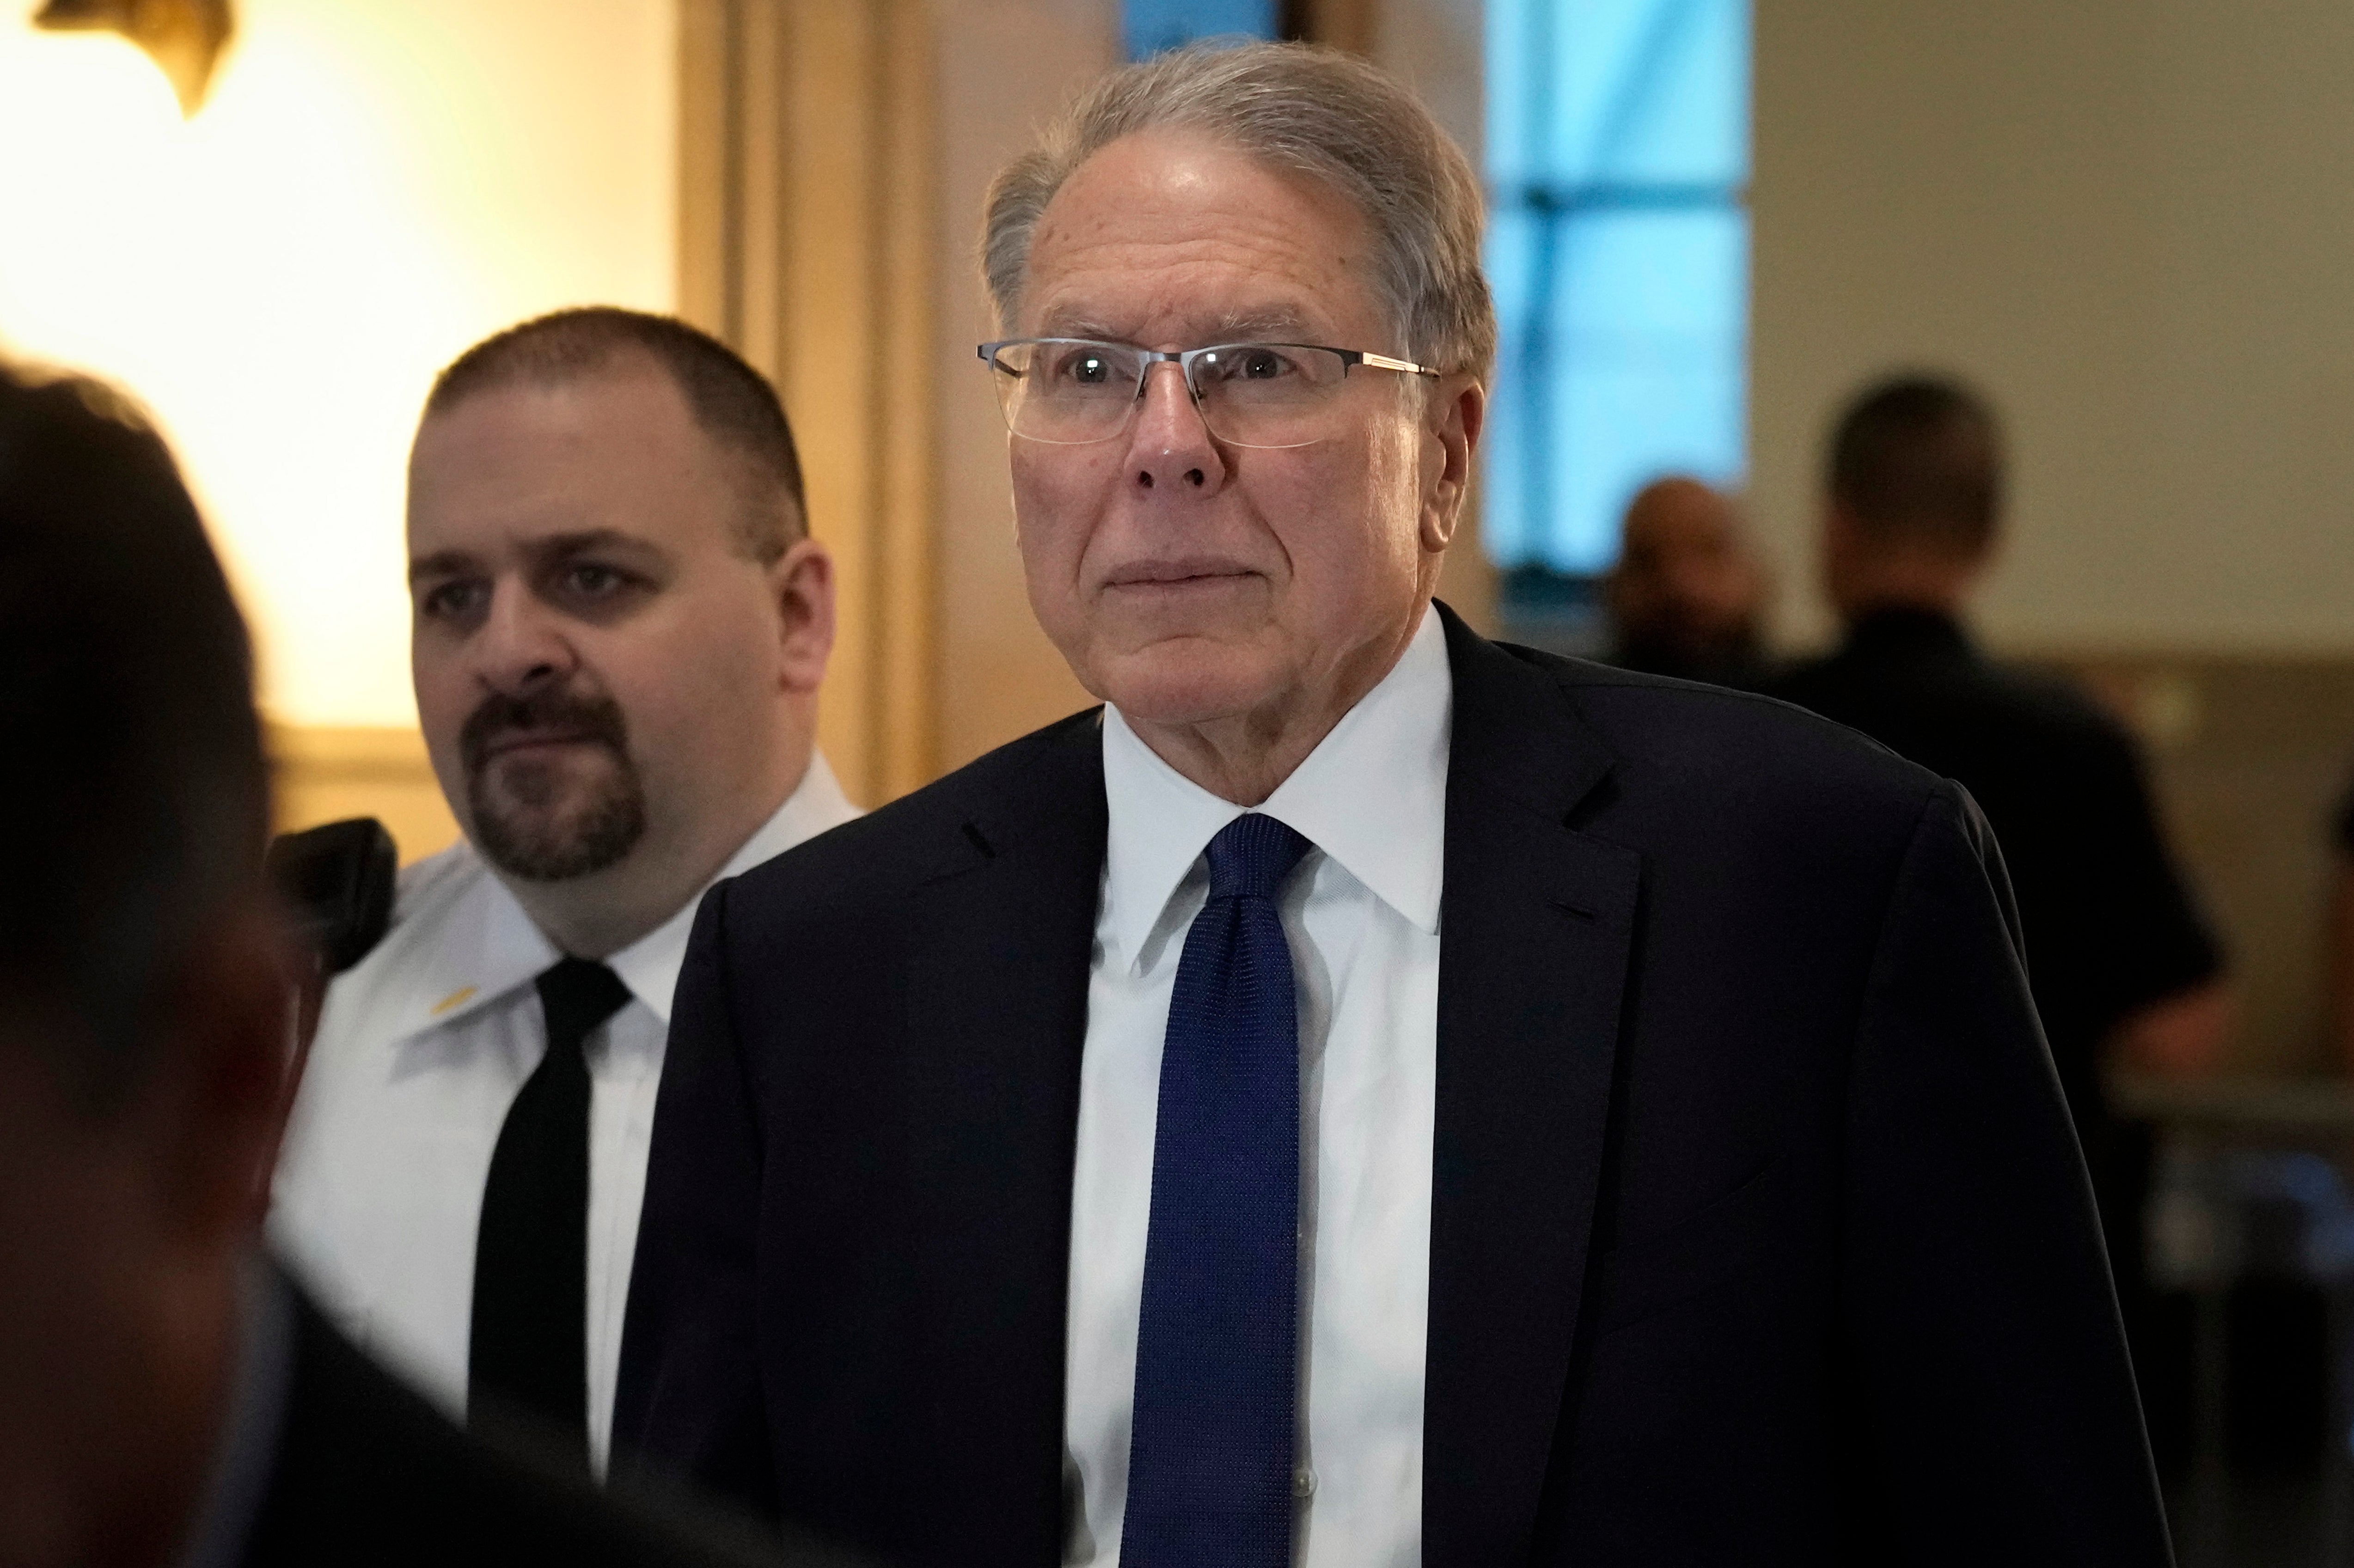 Wayne LaPierre, CEO of the National Rifle Association, arrives at court in New York, Jan. 8, 2024. Closing arguments are expected in state Supreme Court in Manhattan, Thursday, Feb. 15, 2024